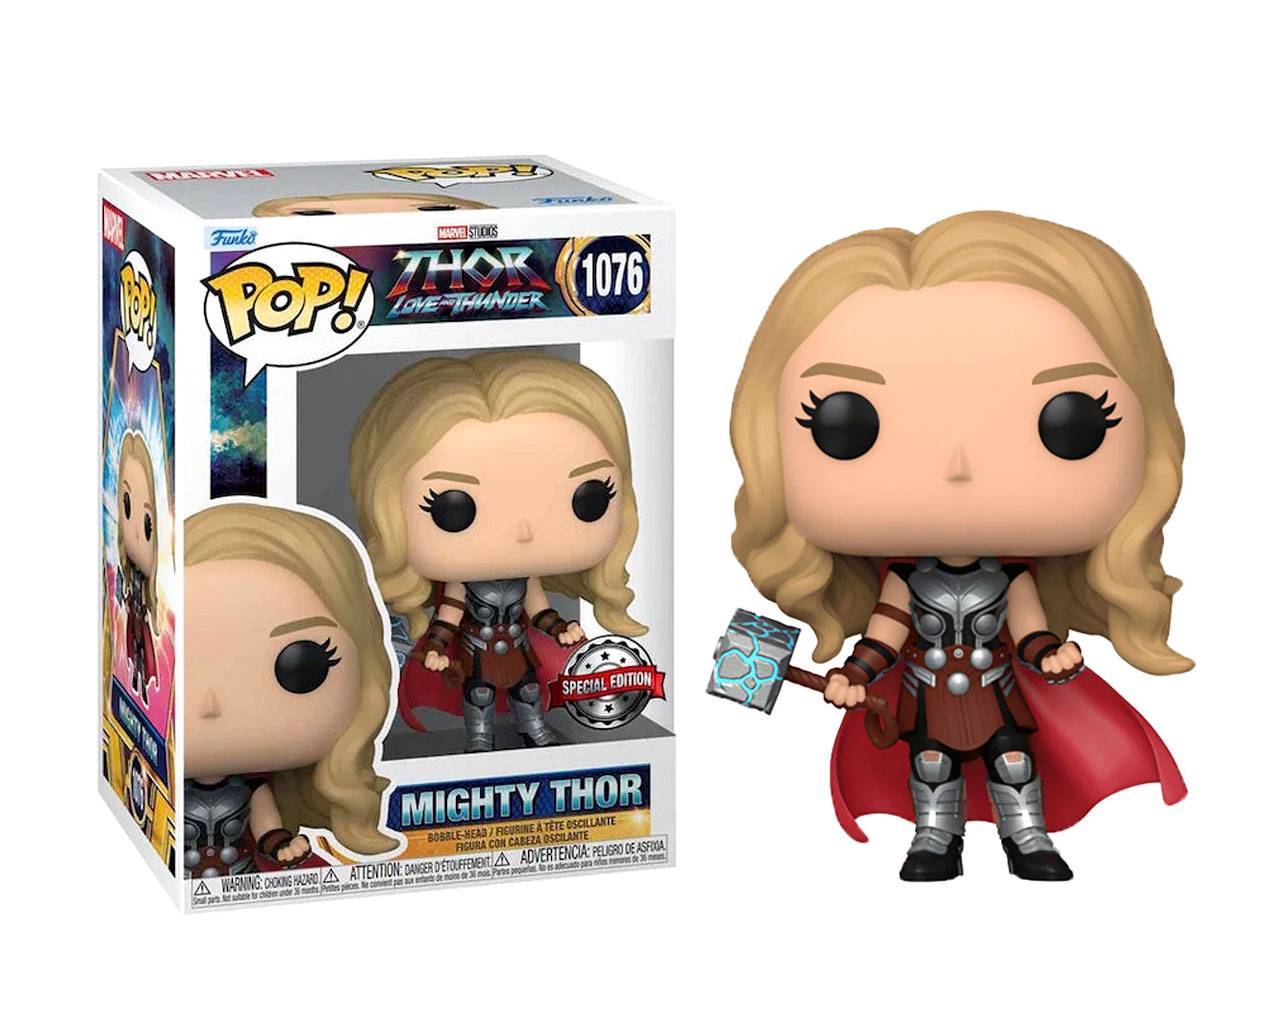 Mighty Thor (Metallic Unmasked) - Thor: Love and Thunder Pop! Vinyl